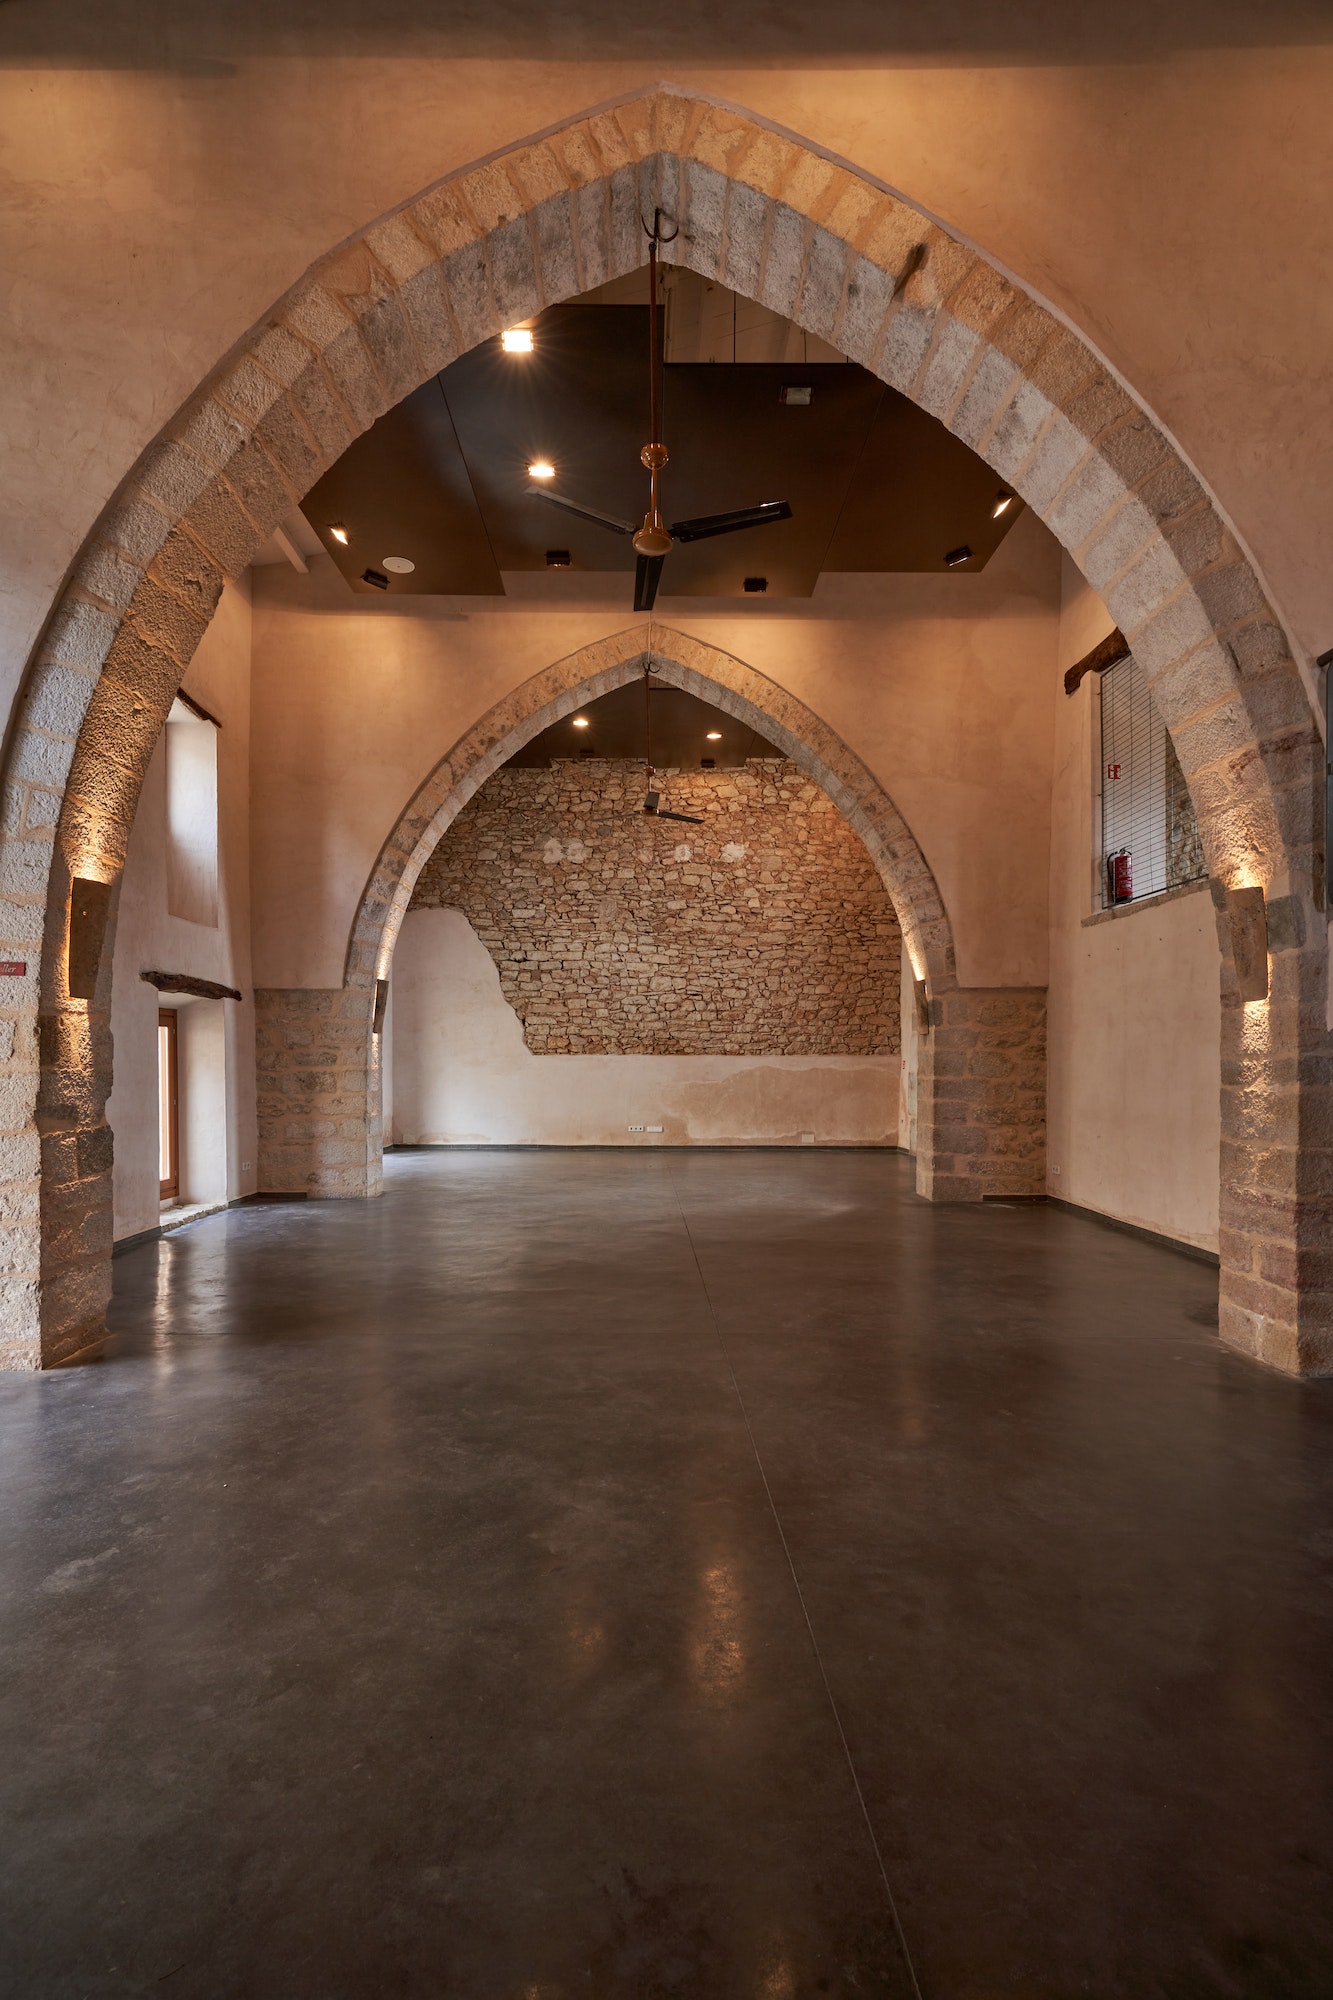 Hallway with arched passages in old building